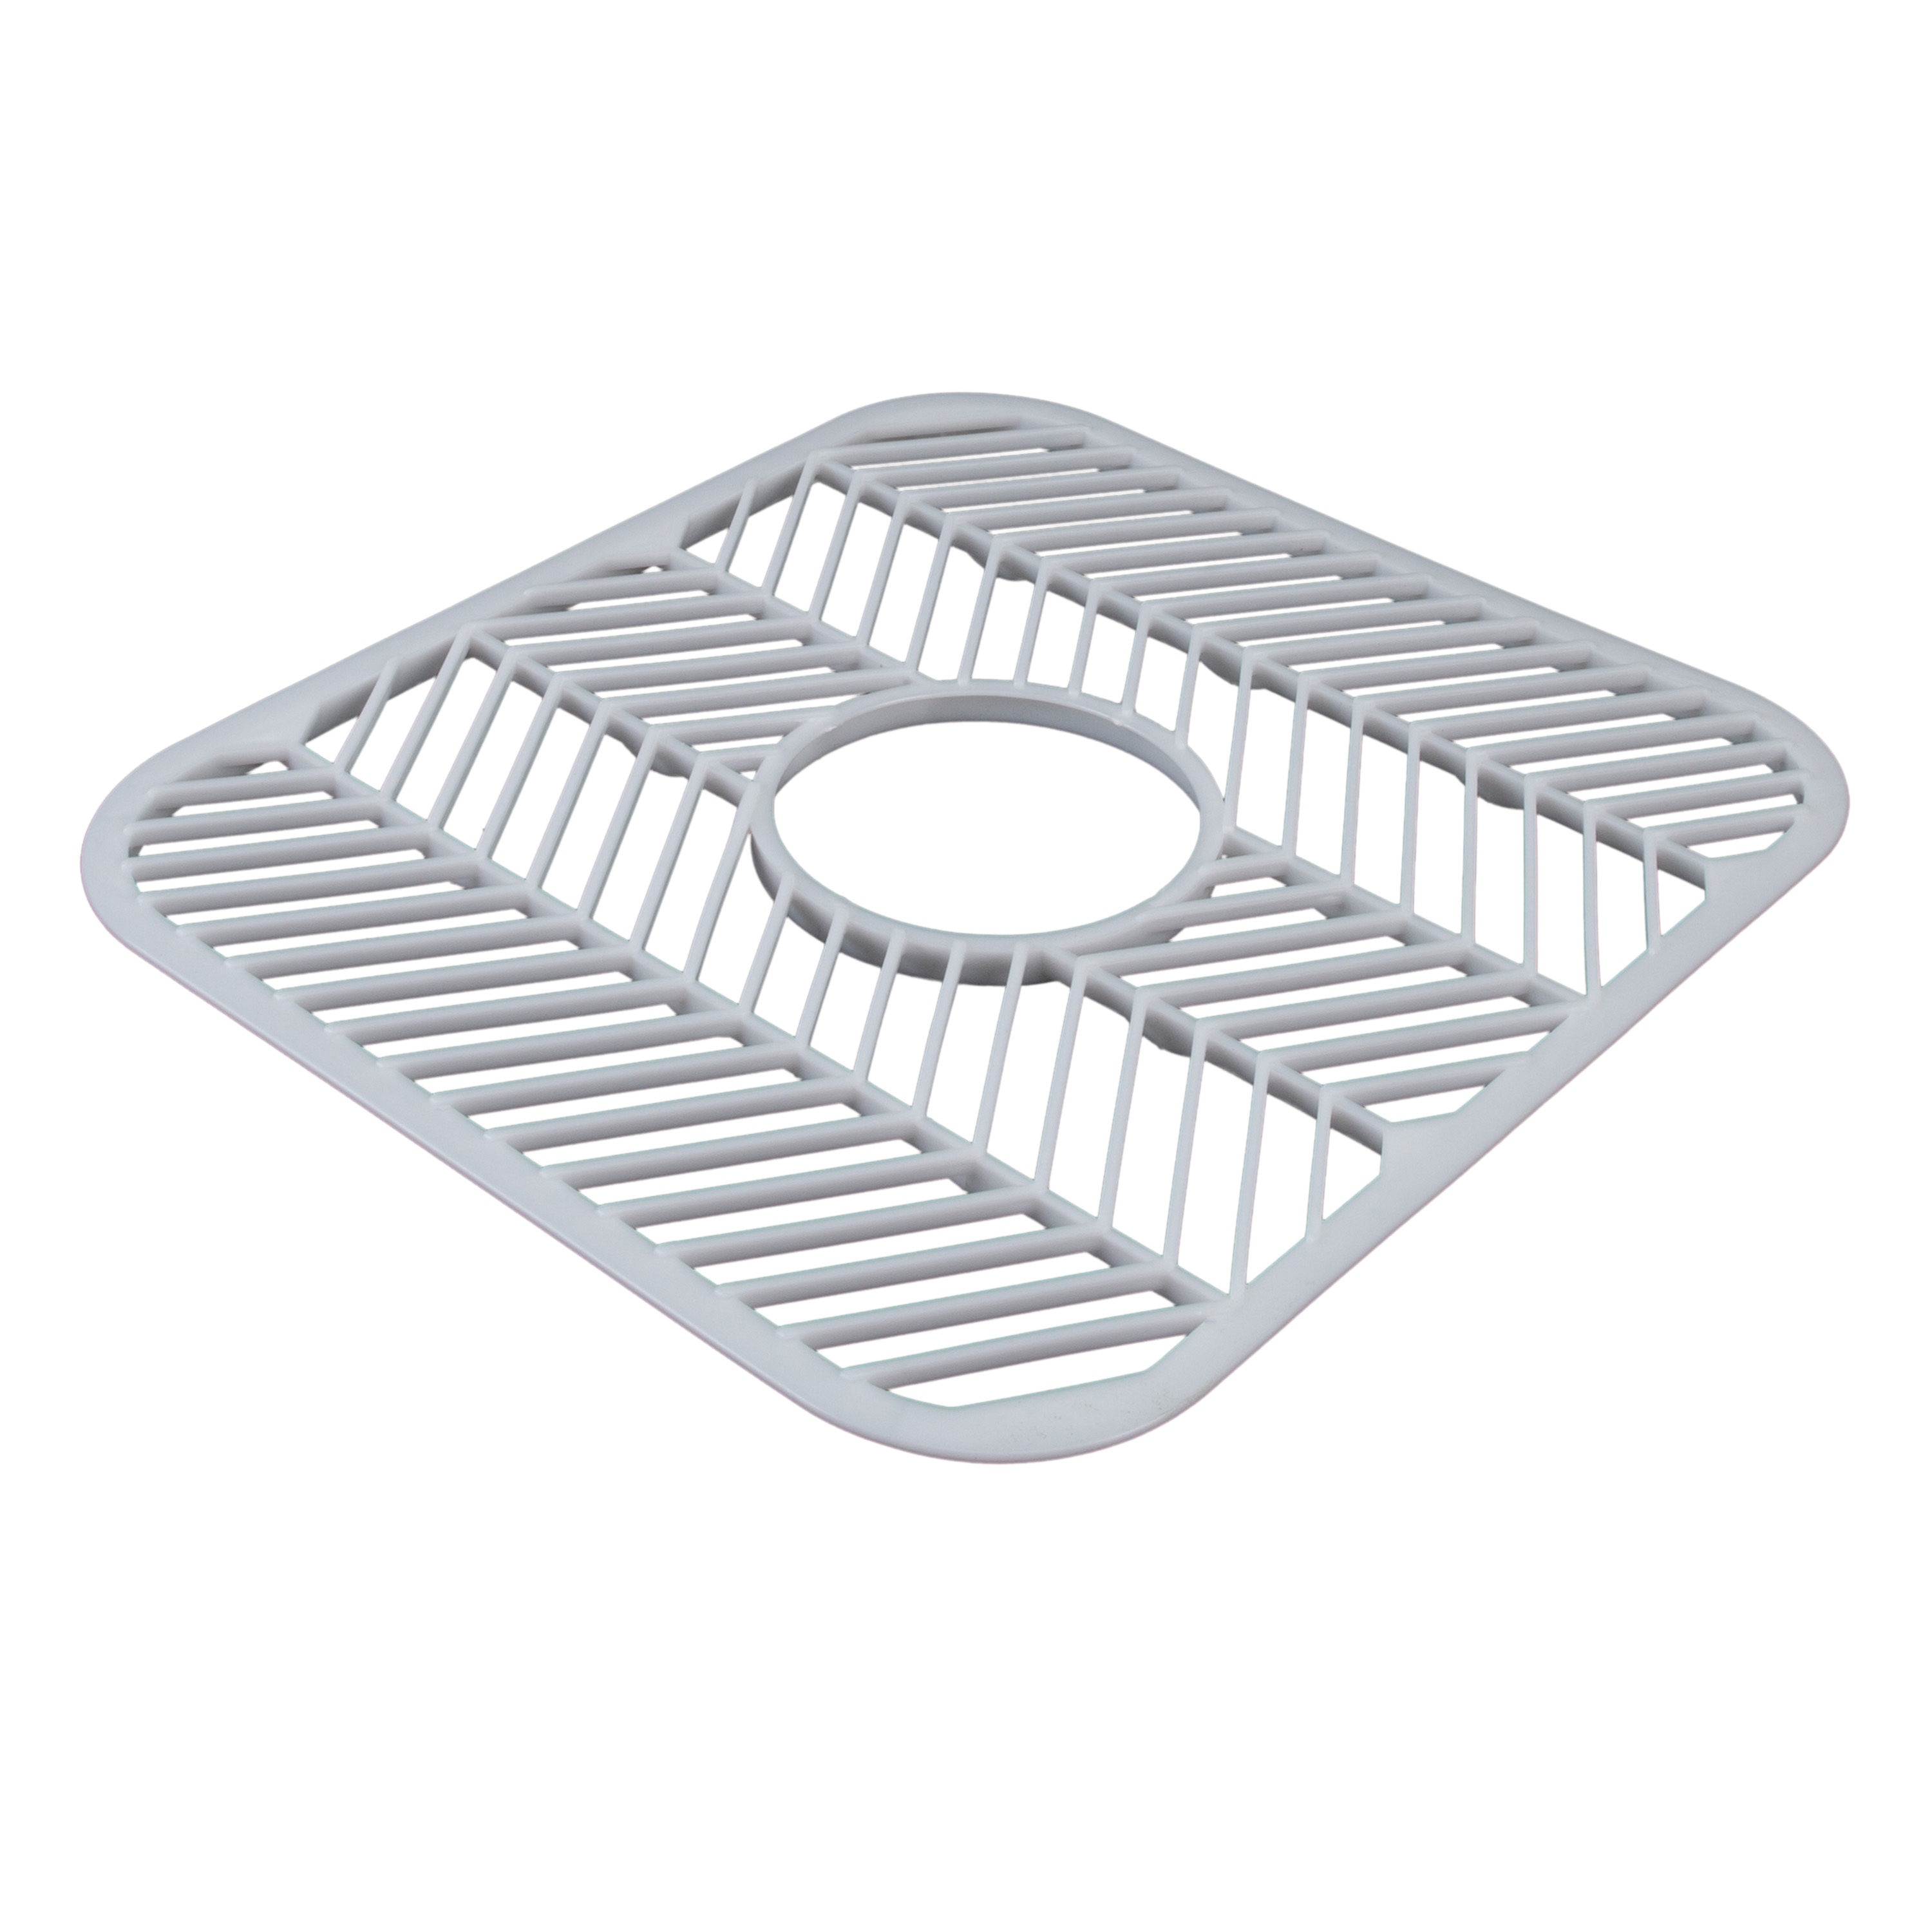 Kitchen Sink Protectors Mat 1 Pack, Silicone Sink Grid For Bottom Of  Kitchen Sink, Sink Mats For St